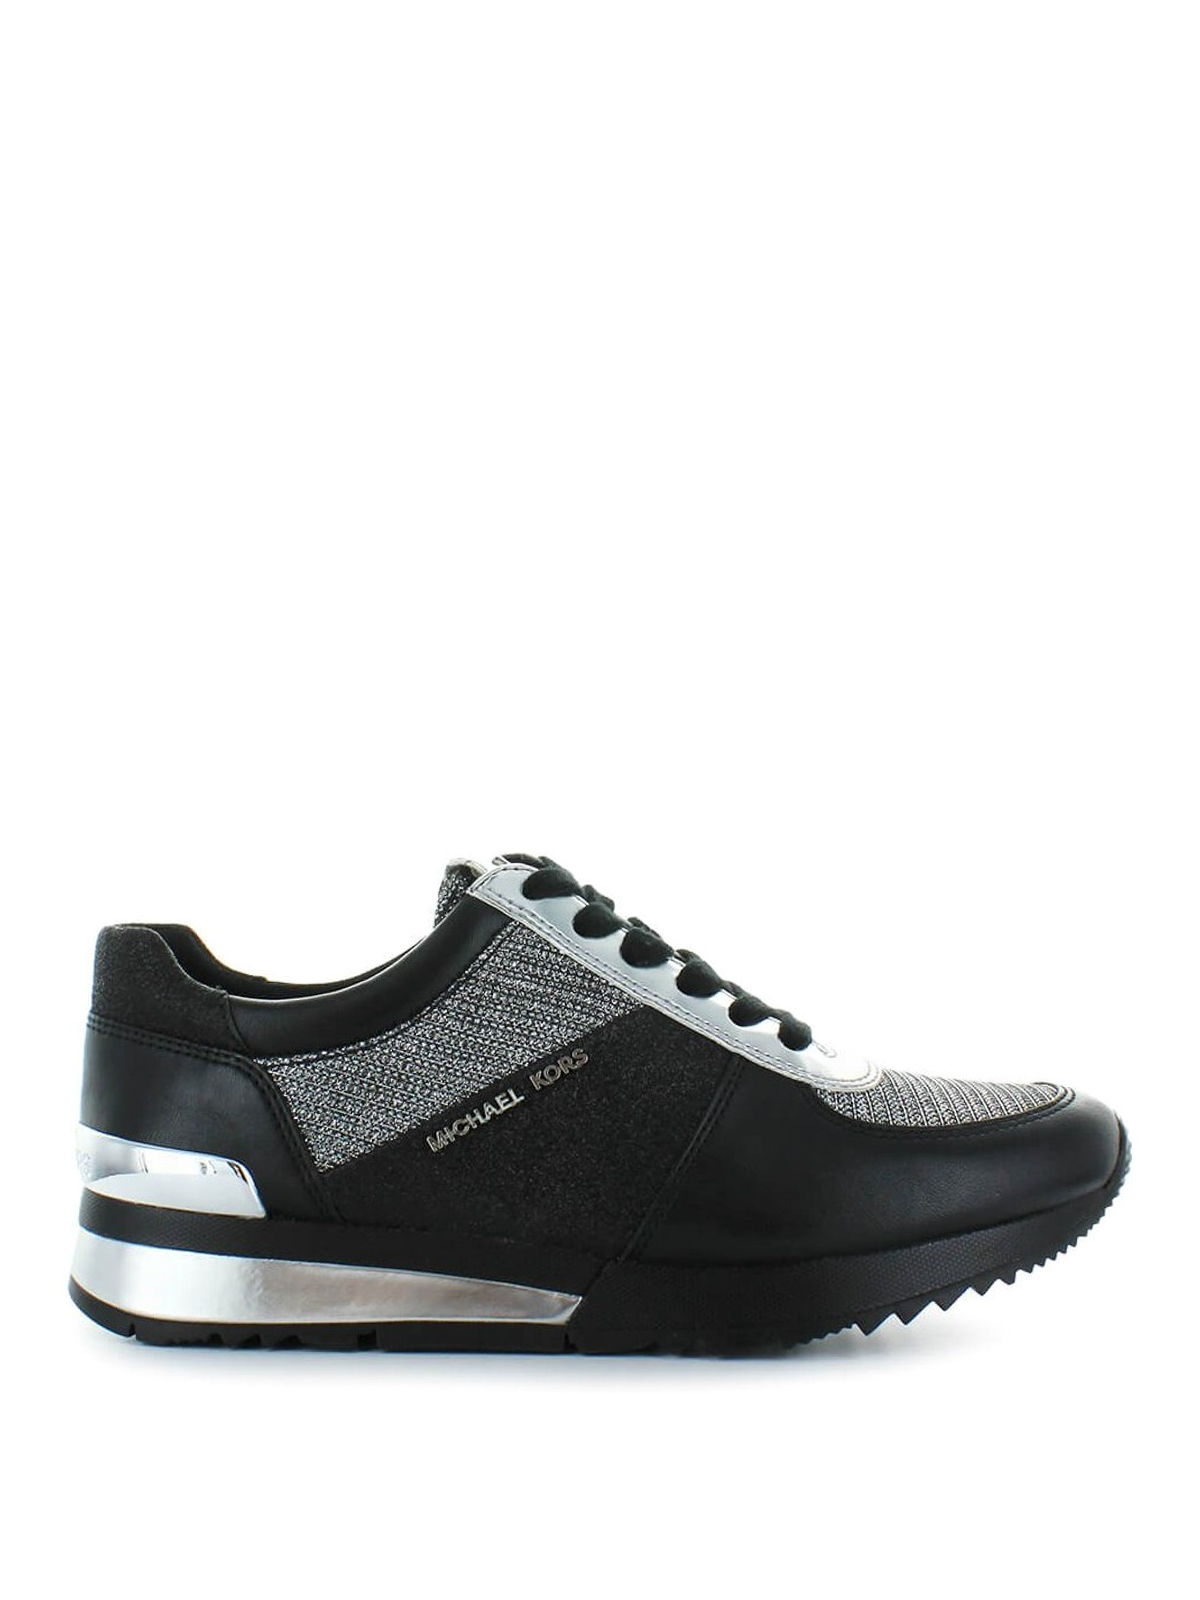 Trainers Michael Kors - Allie black leather and silver lurex sneakers -  43T8ALFS2D023